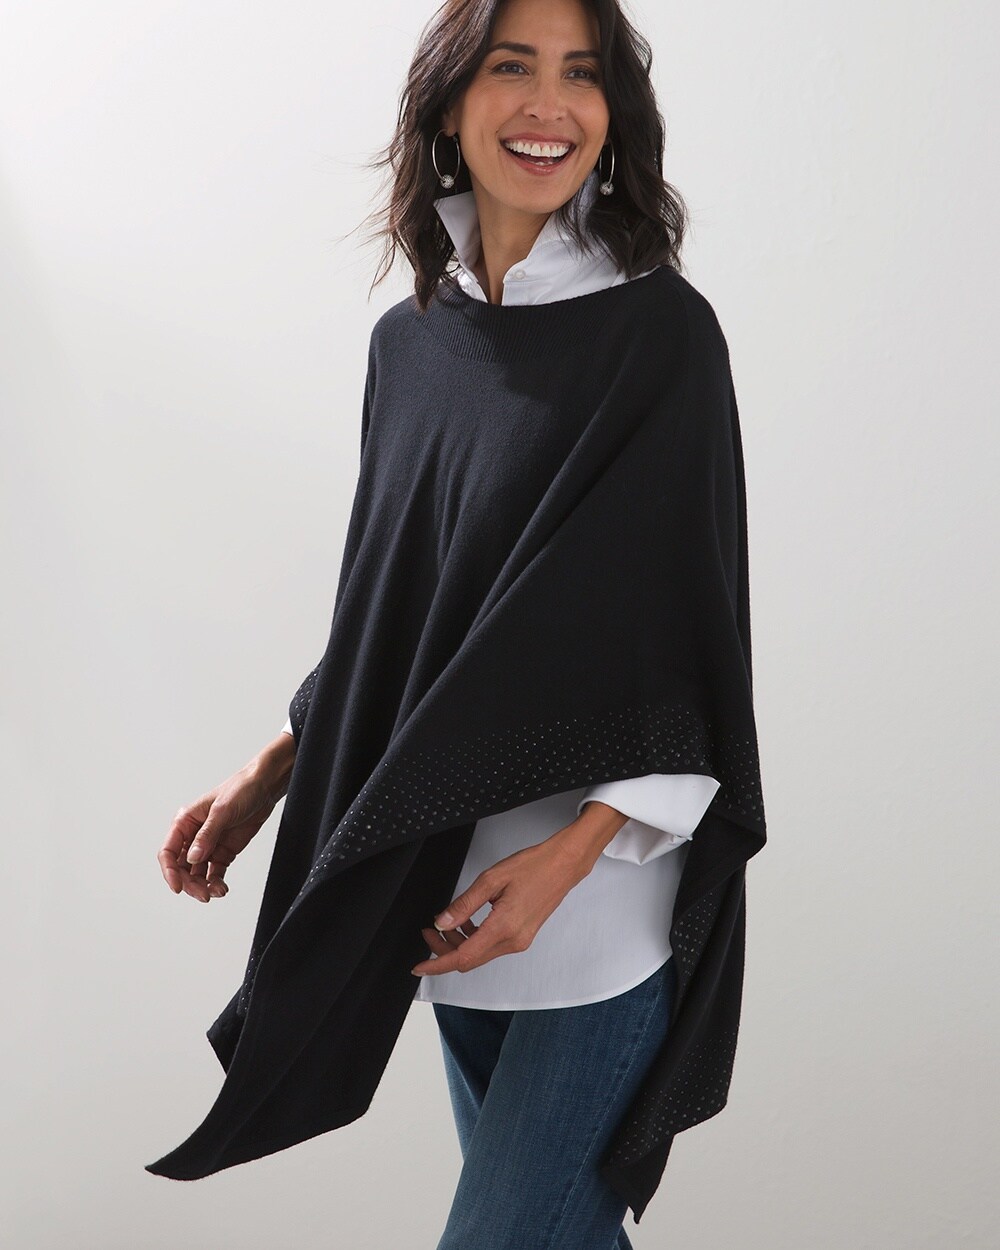 Embellished Poncho Sweater video preview image, click to start video